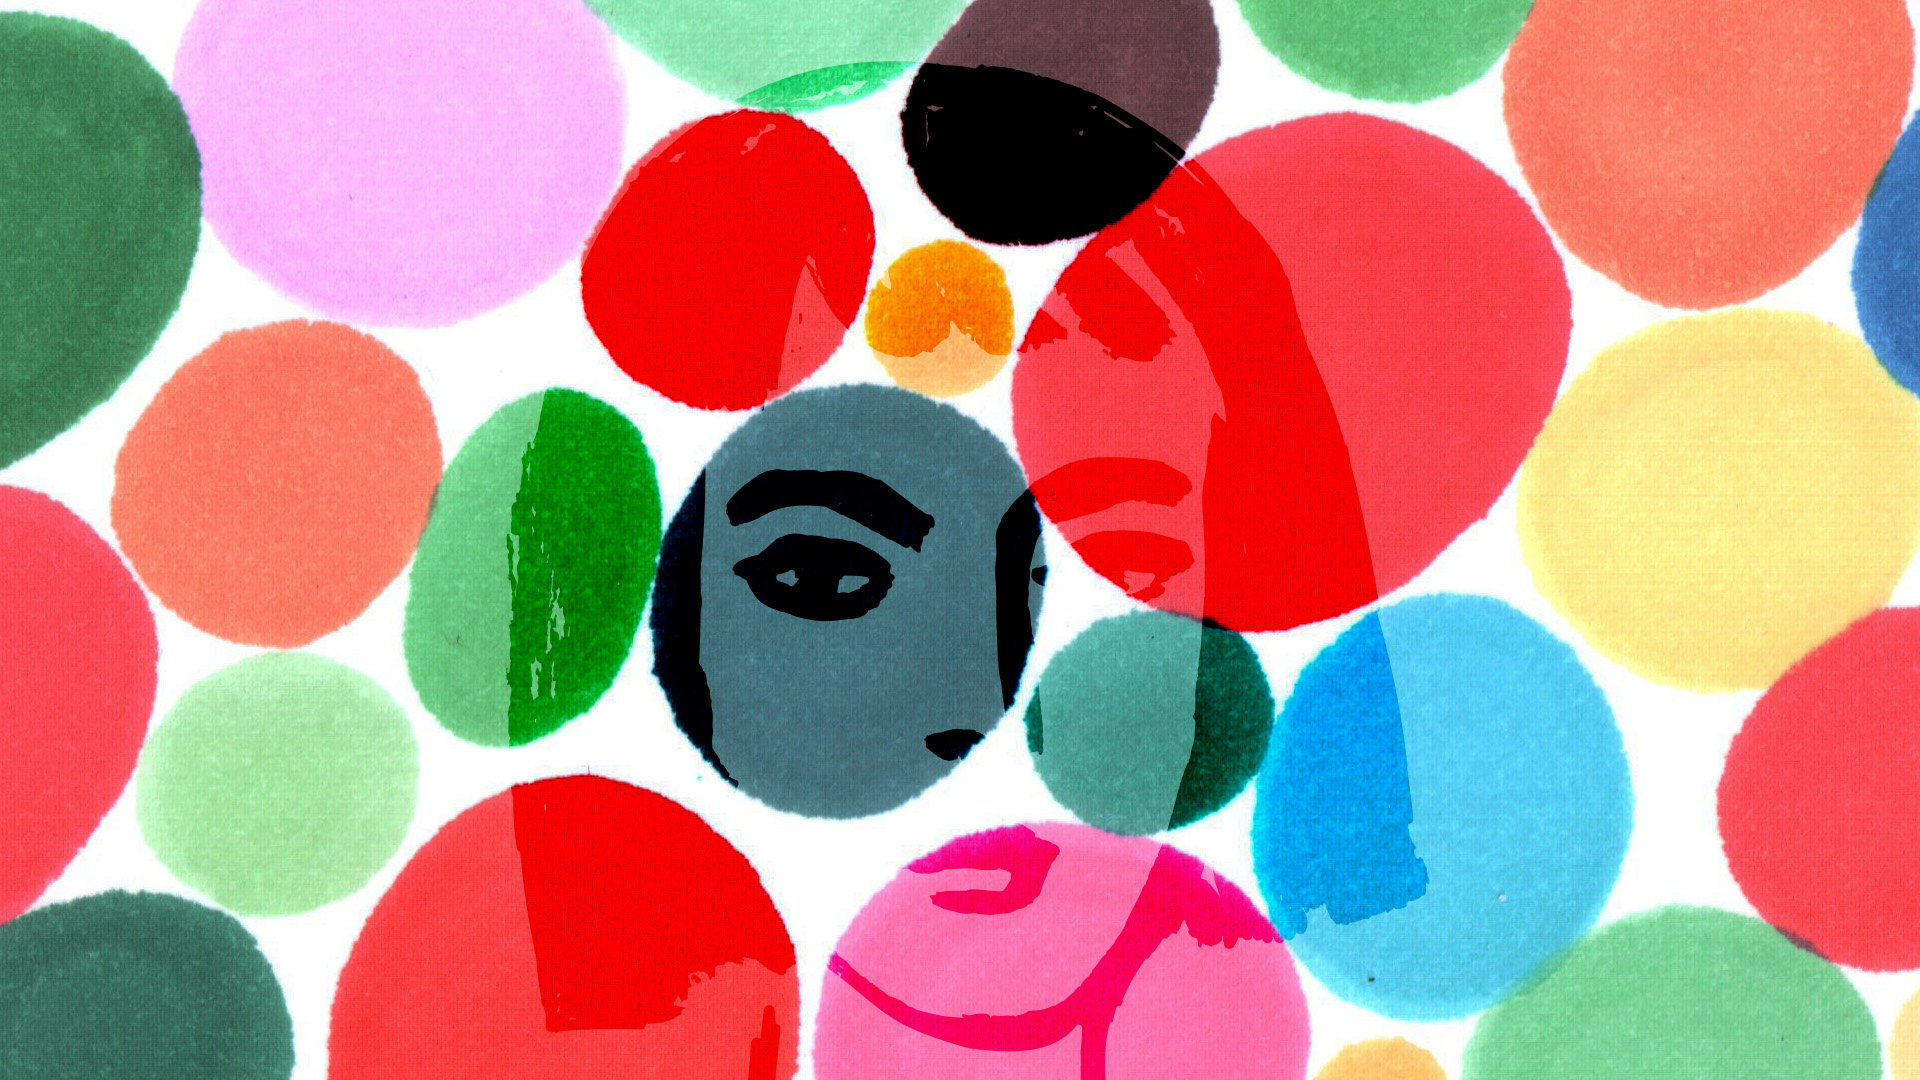 An image is filled with colorful round shapes made with marker. A woman’s facial features appear on several of the shapes in different colors.